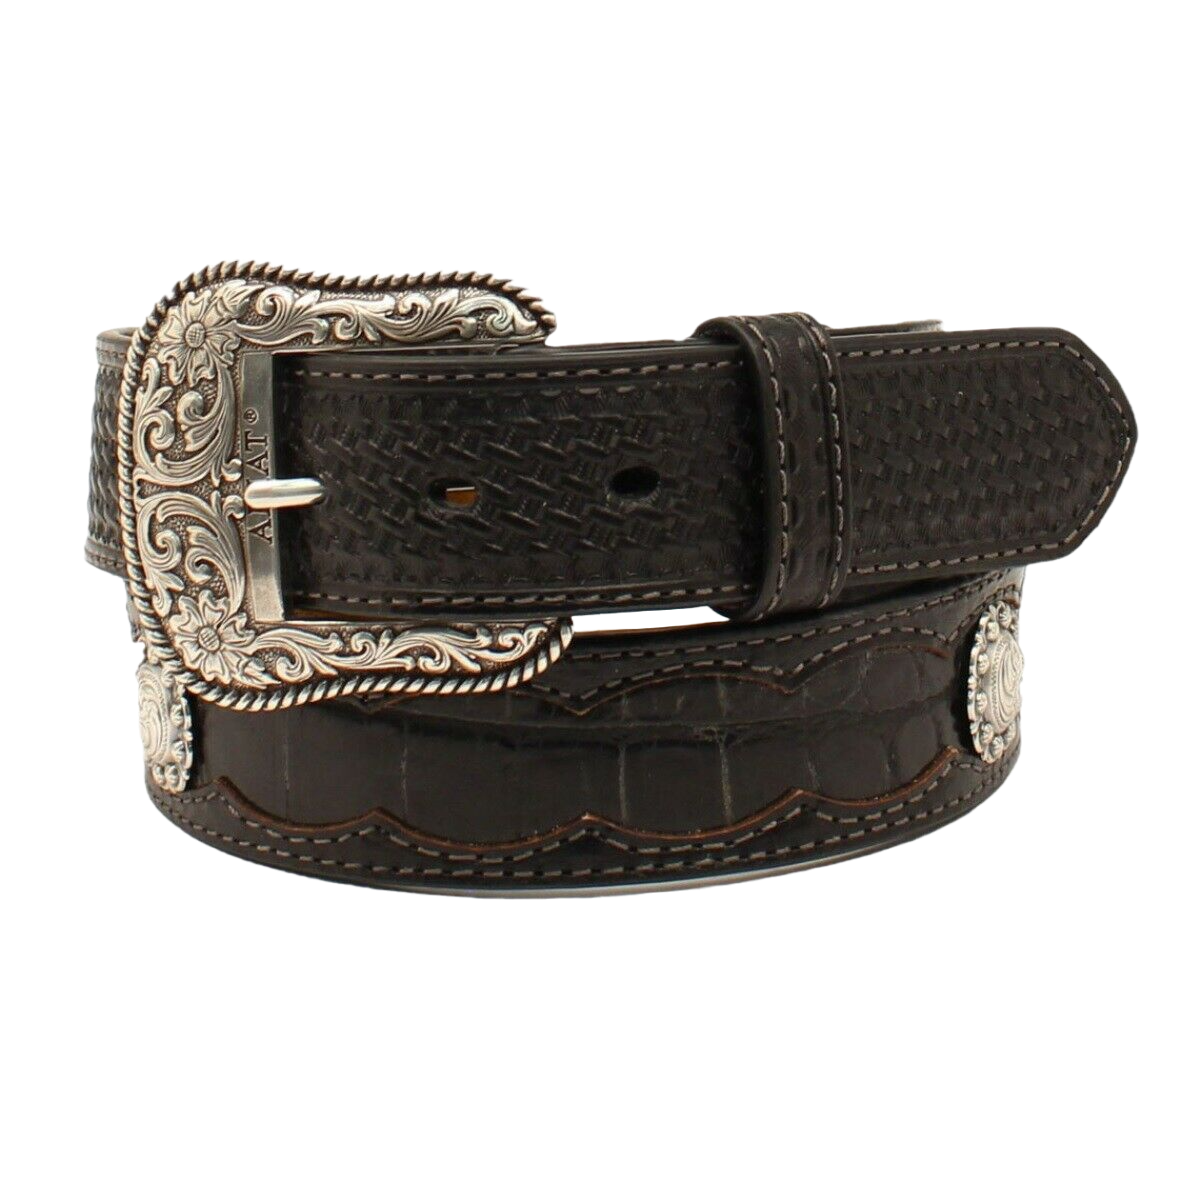 Ariat® Men's Basket Weave tab With Crocodile Inlay Belt A1035401